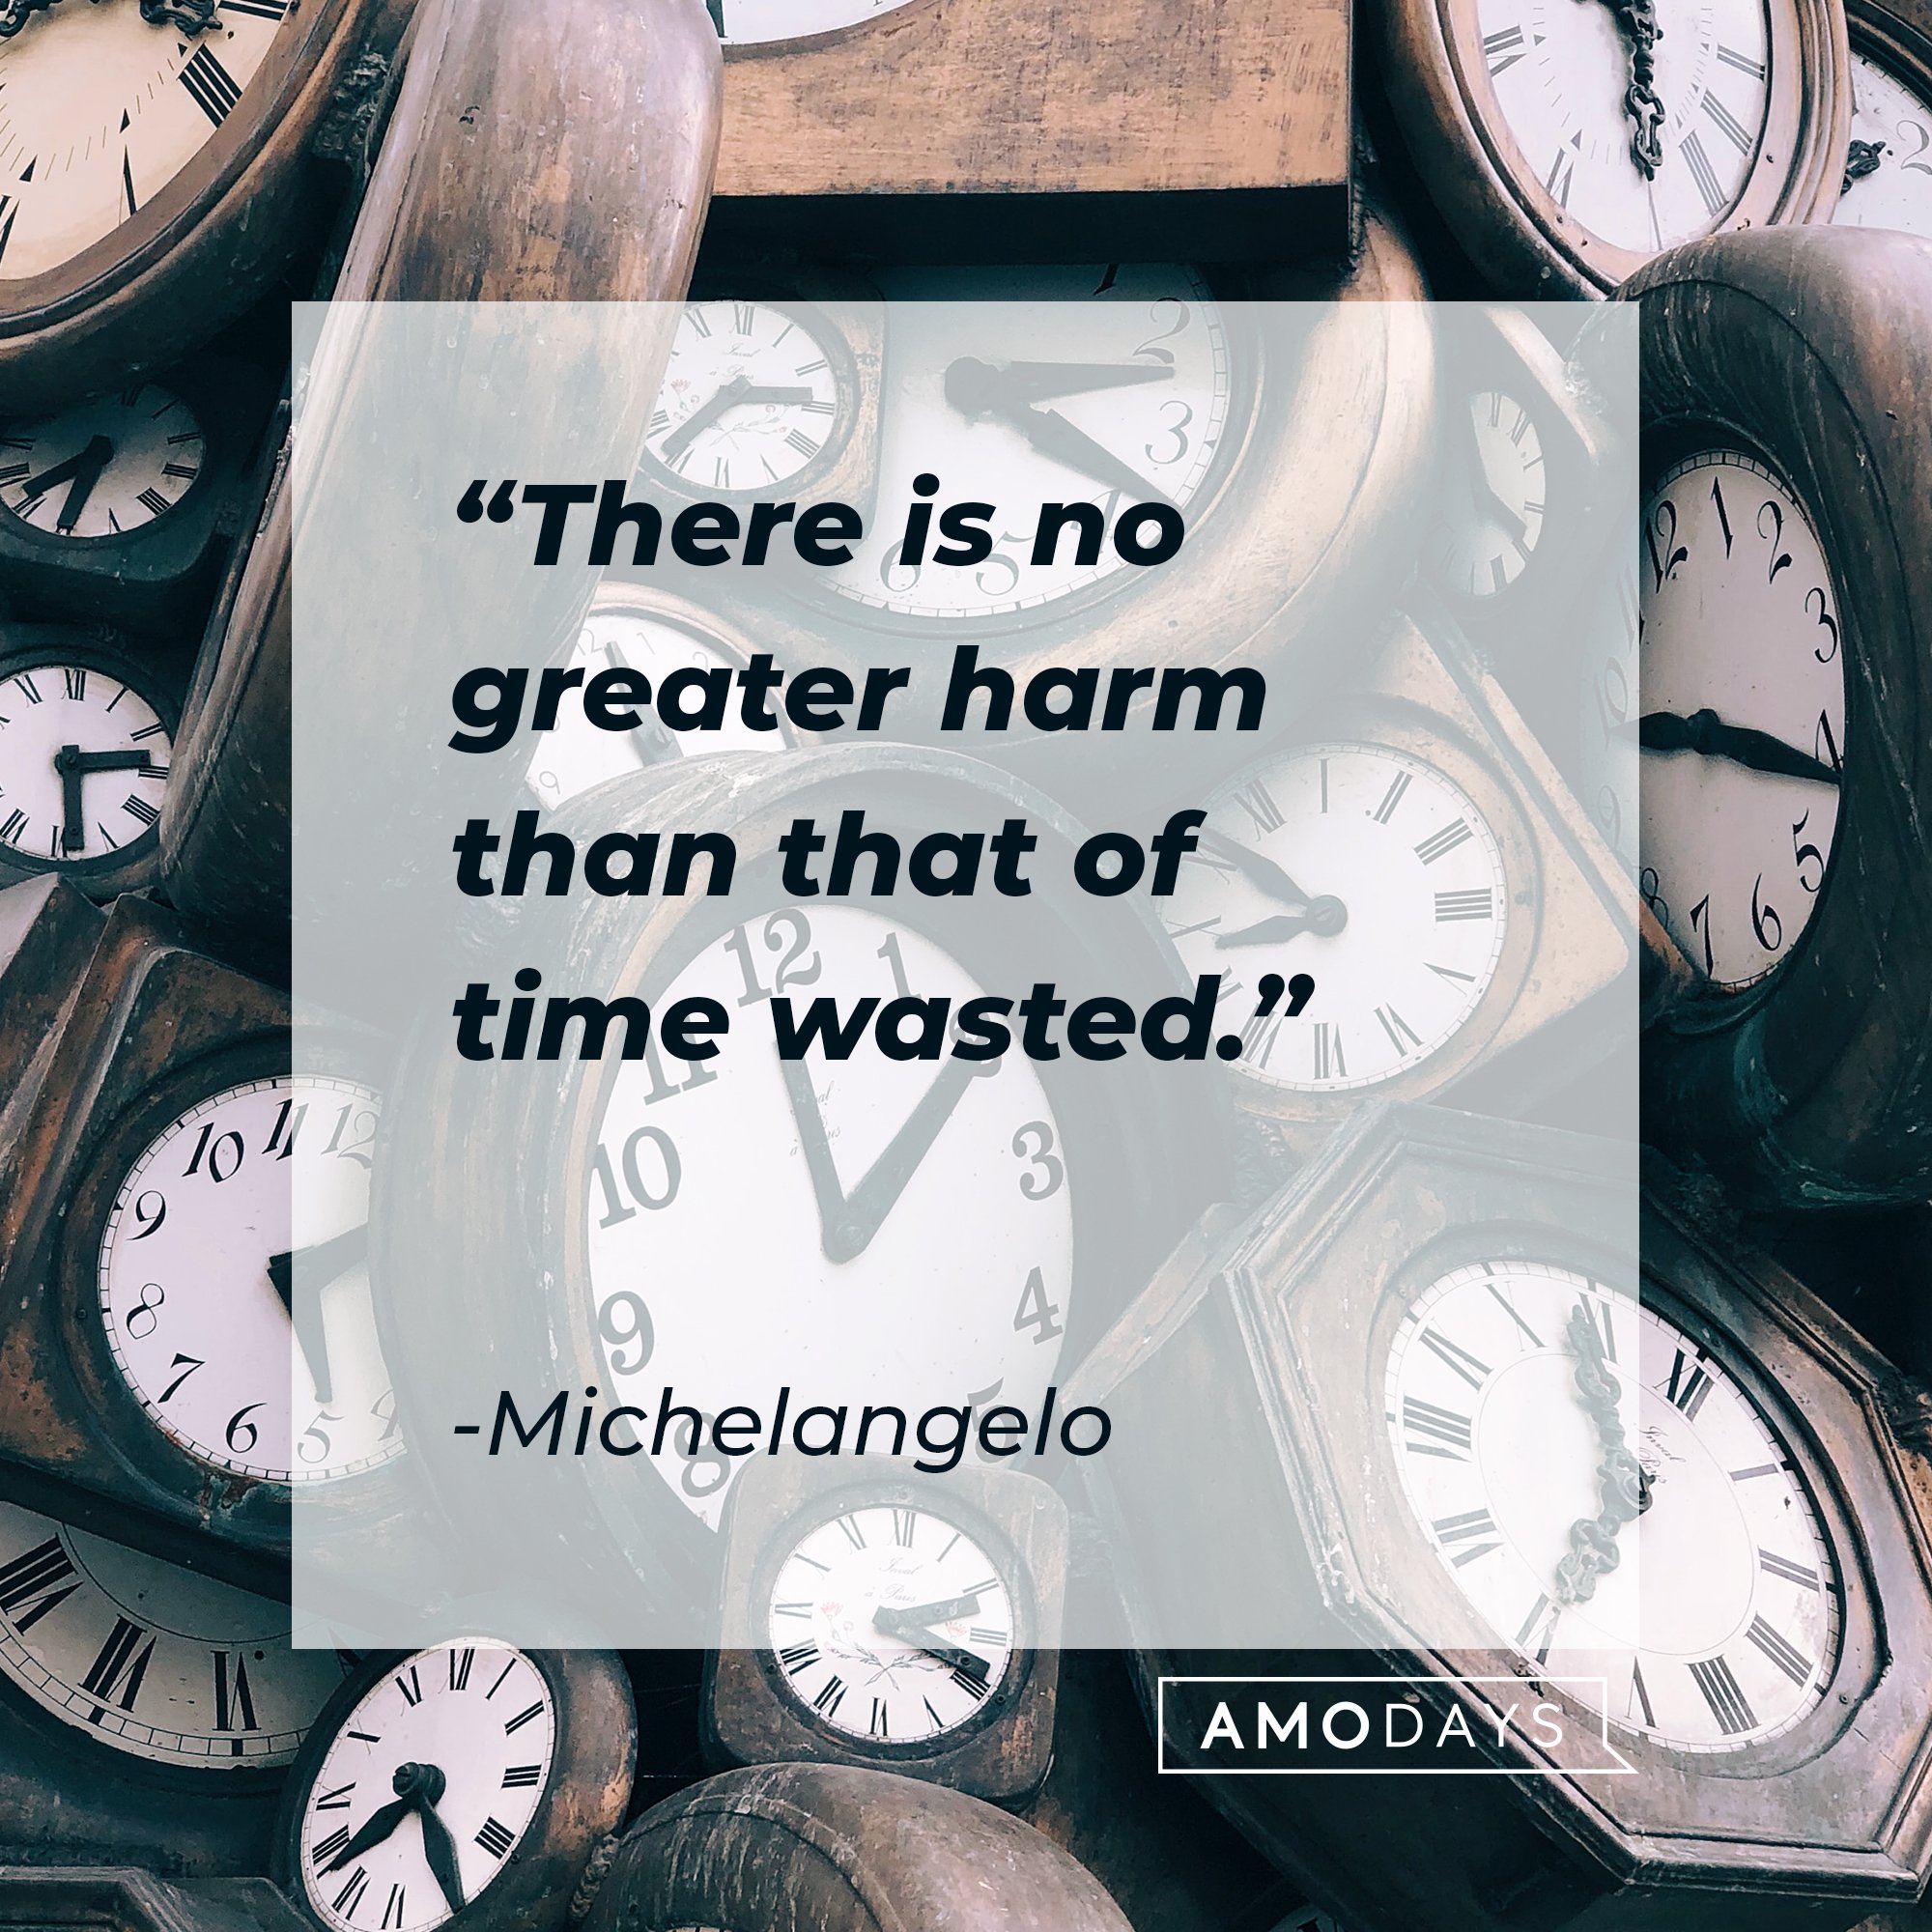 Michelangelo's quote: "There is no greater harm than that of time wasted." | Image: AmoDays 